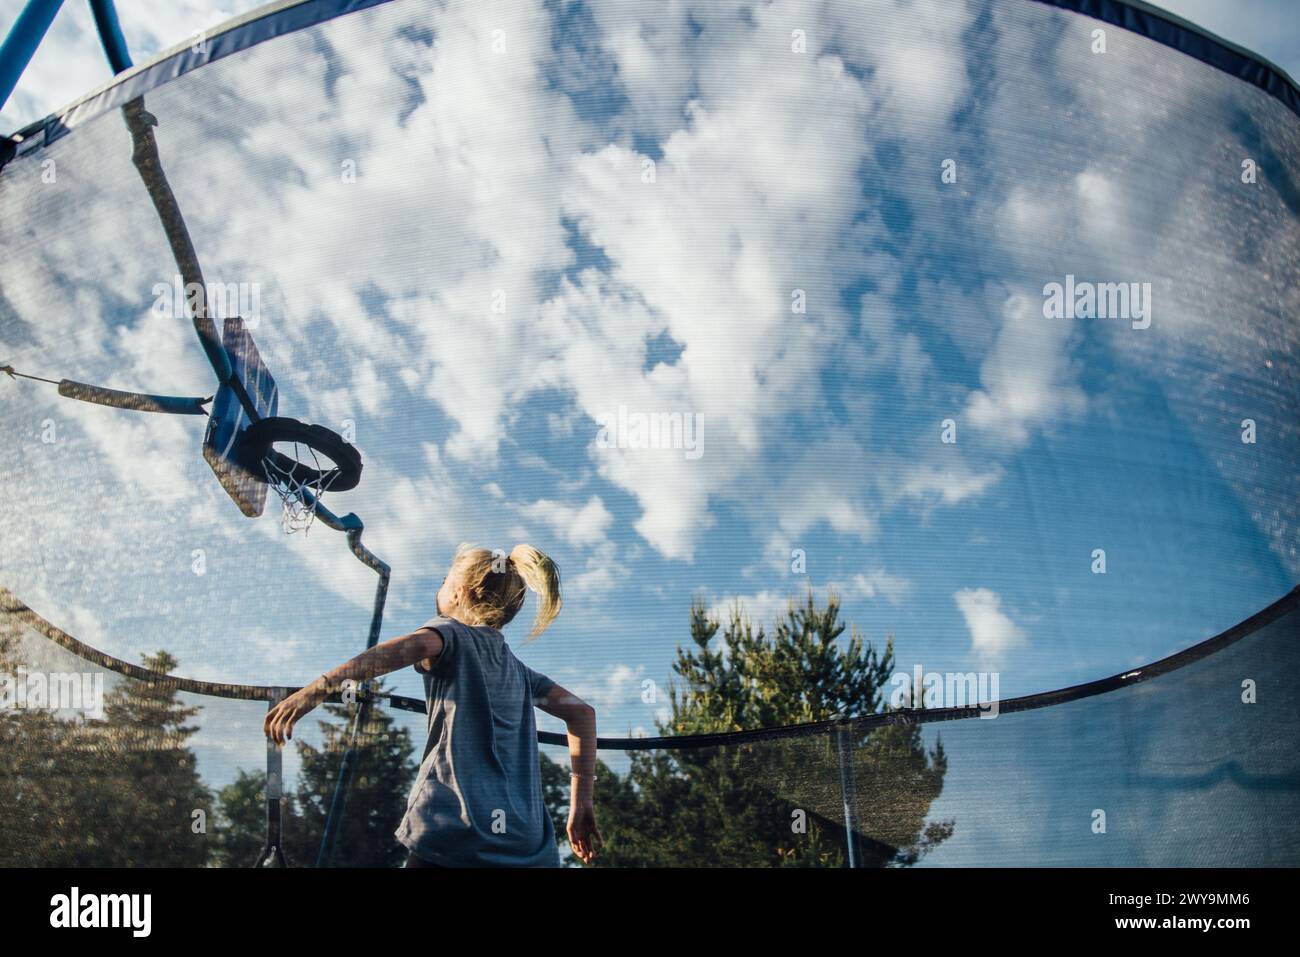 Girl playing basketball on trampoline with wide view of clouds in sky Stock Photo